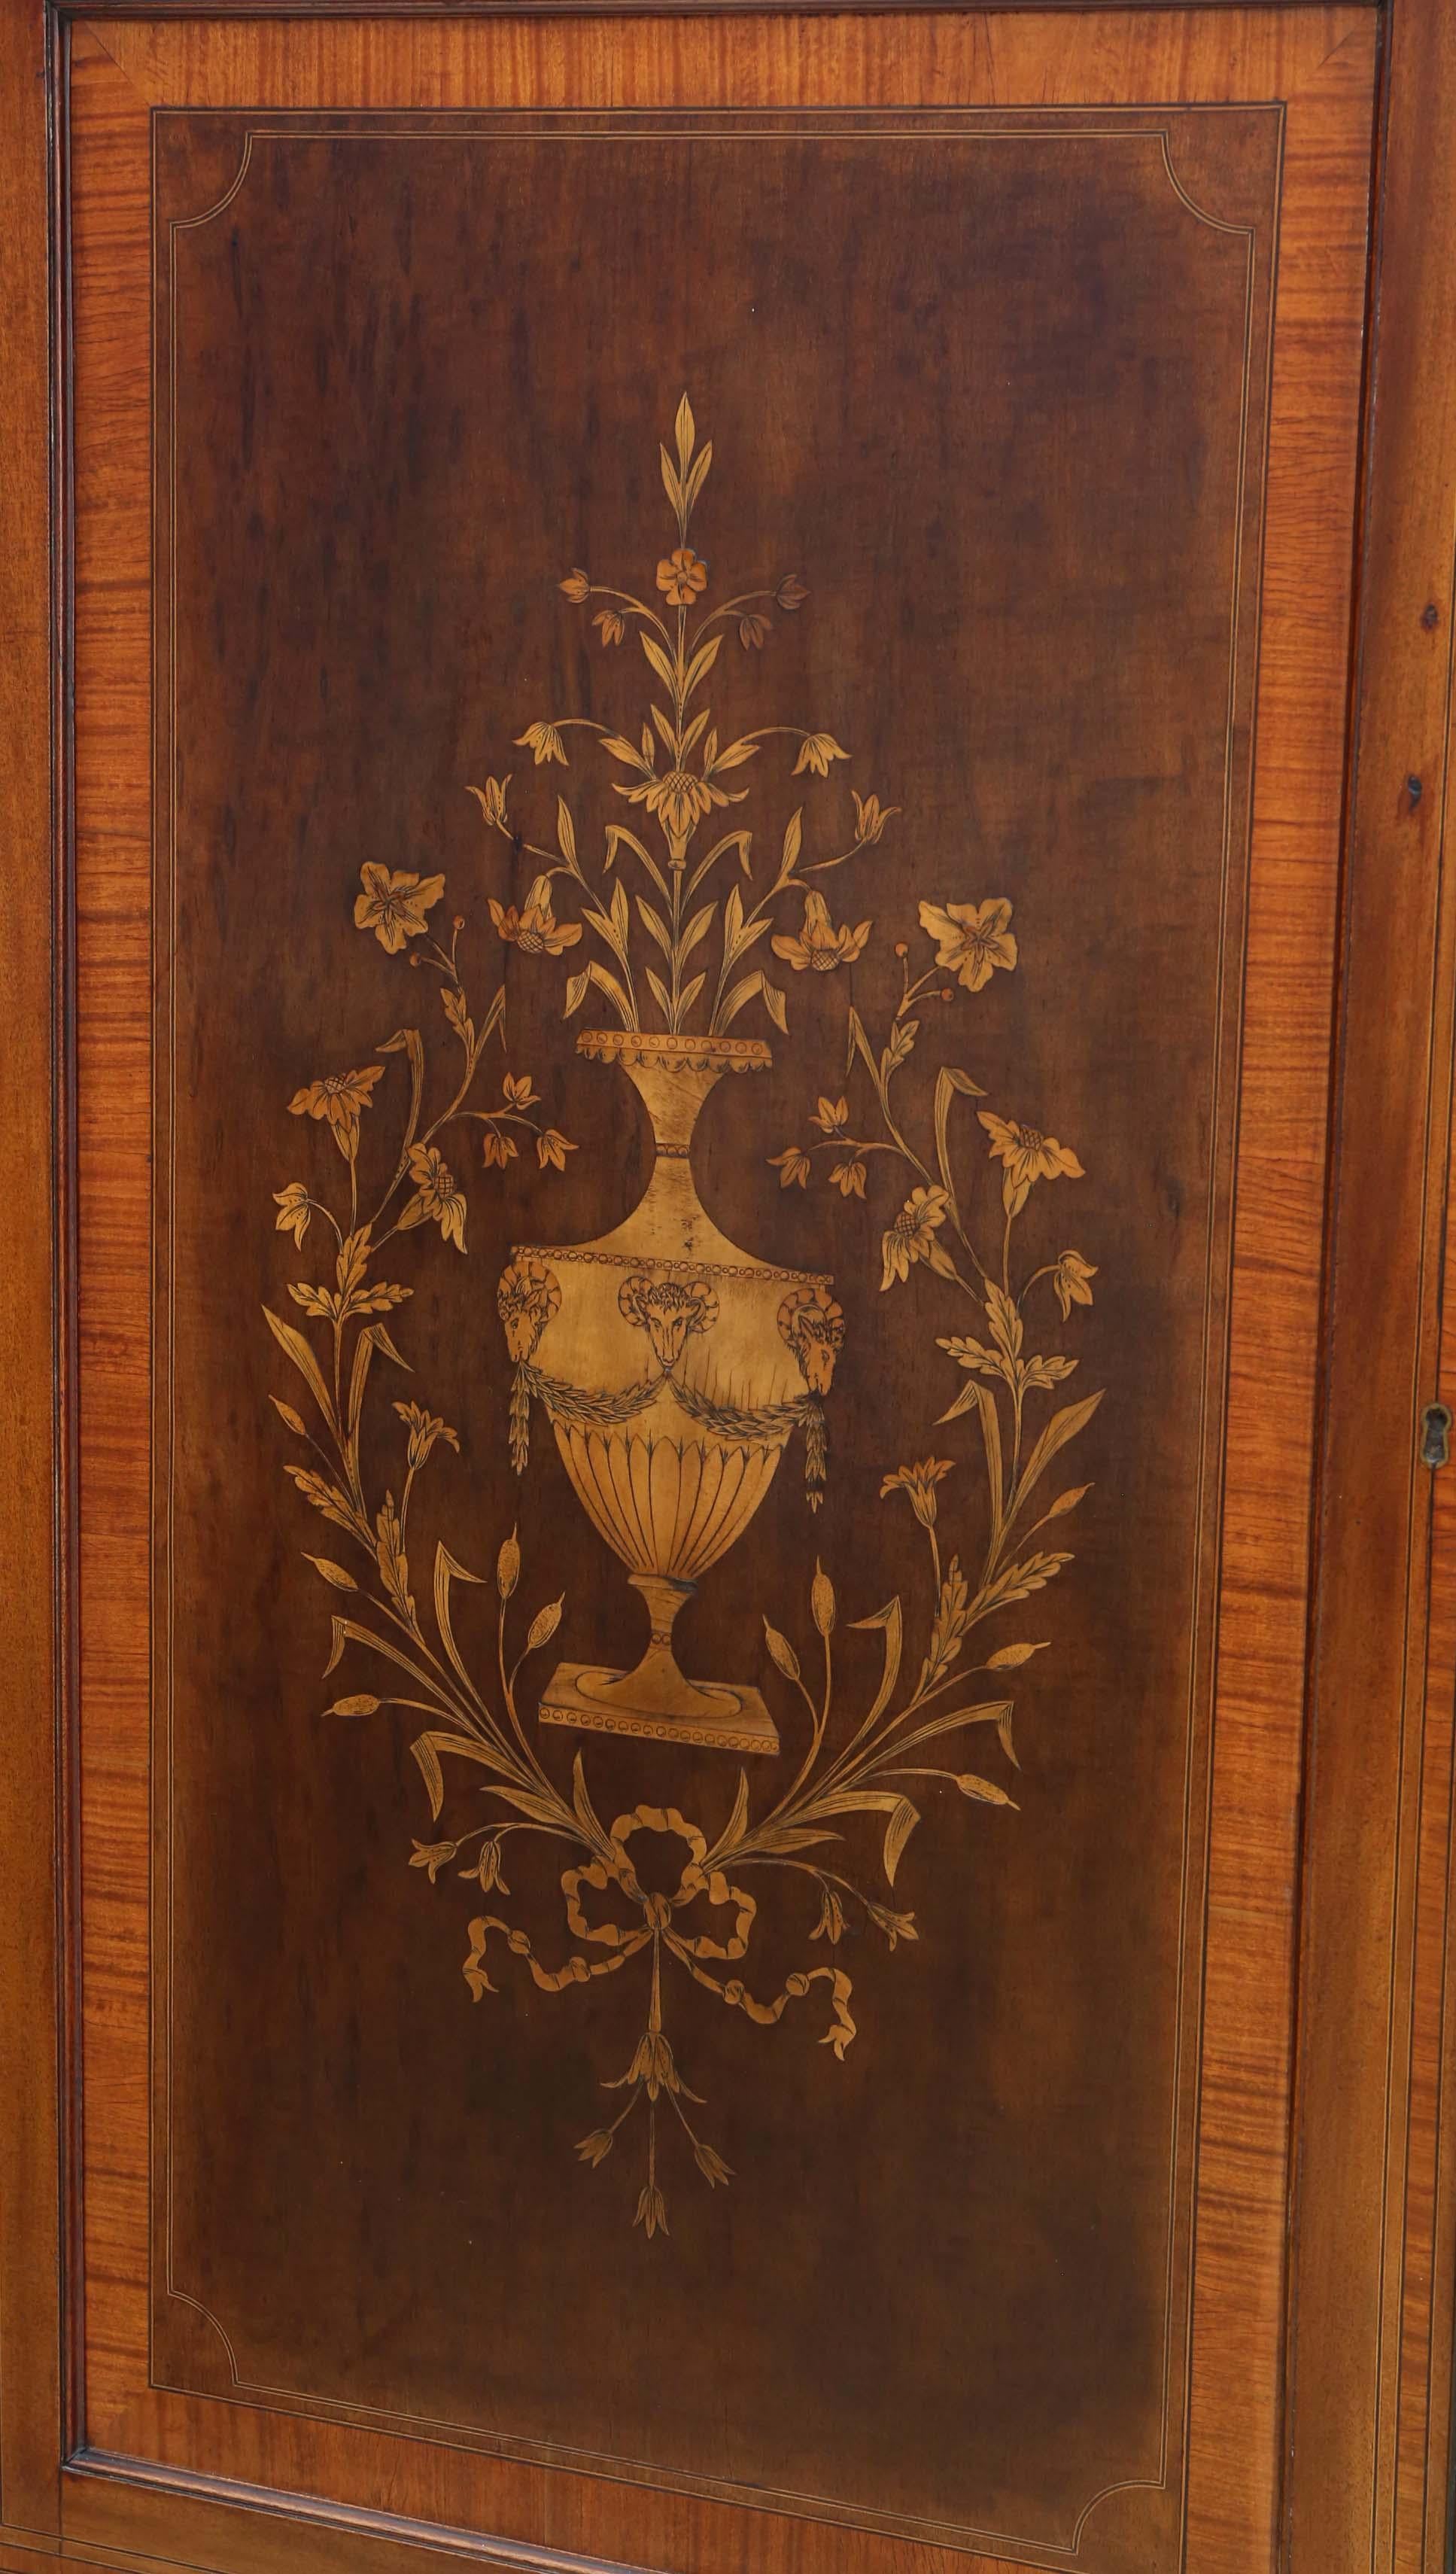 Antique fine quality mid-19th century marquetry mahogany linen press wardrobe buy arguably one of the best London makers 'Edwards and Roberts'.

Solid and strong, with no loose joints. Full of age, character and charm. Magnificent marquetry to the